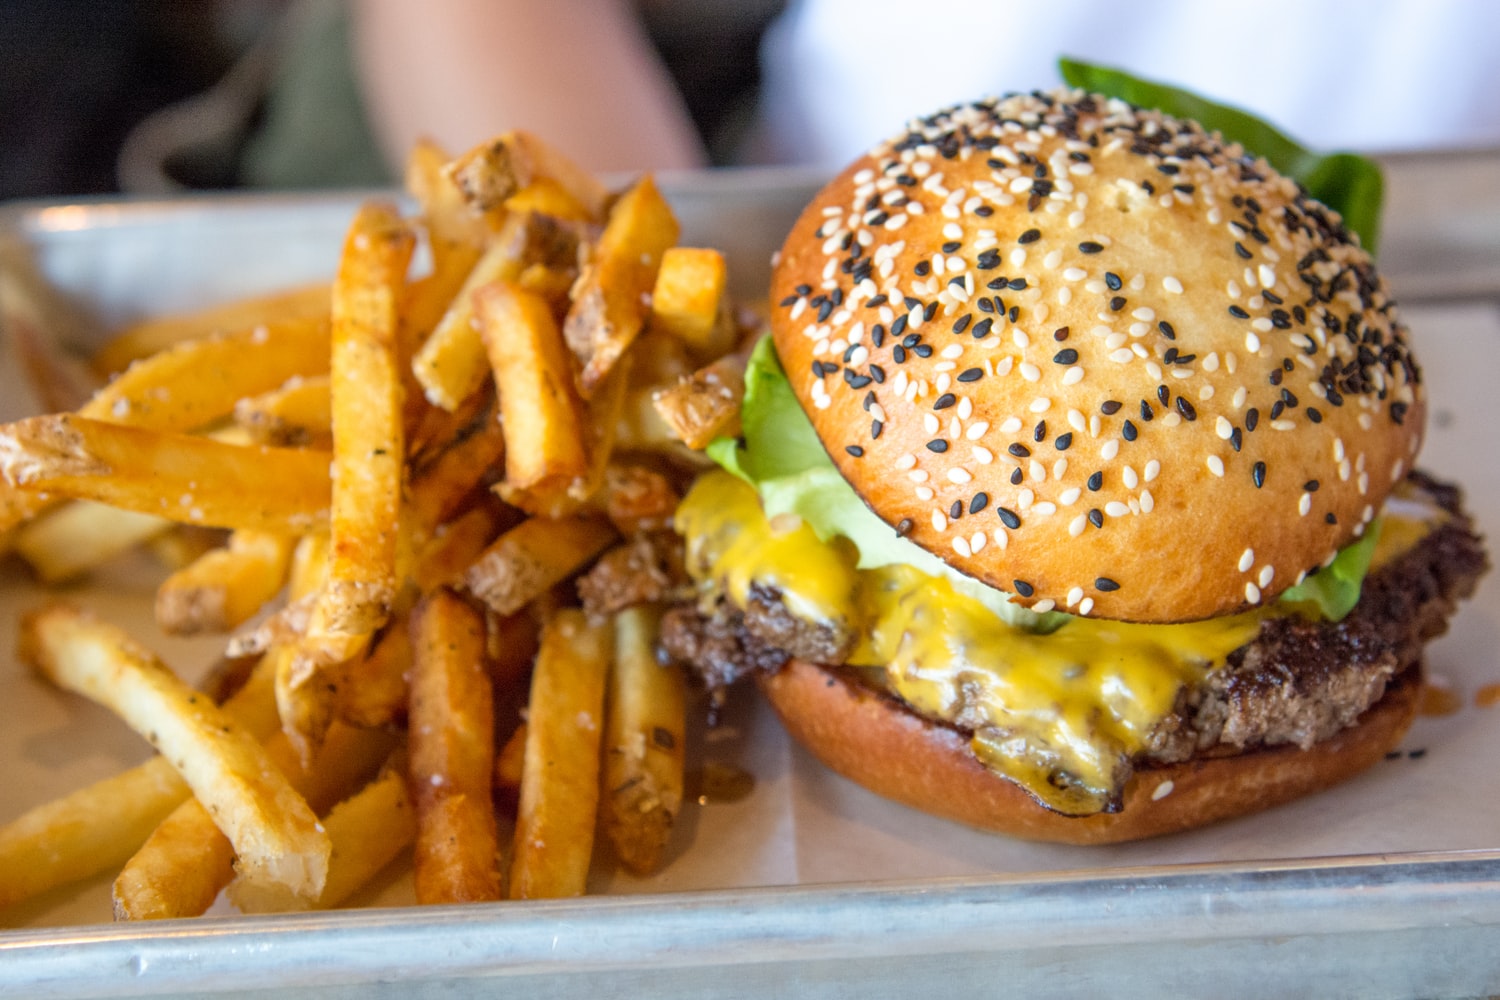 Upper Ivy Food Guide: The best burgers in Culver City